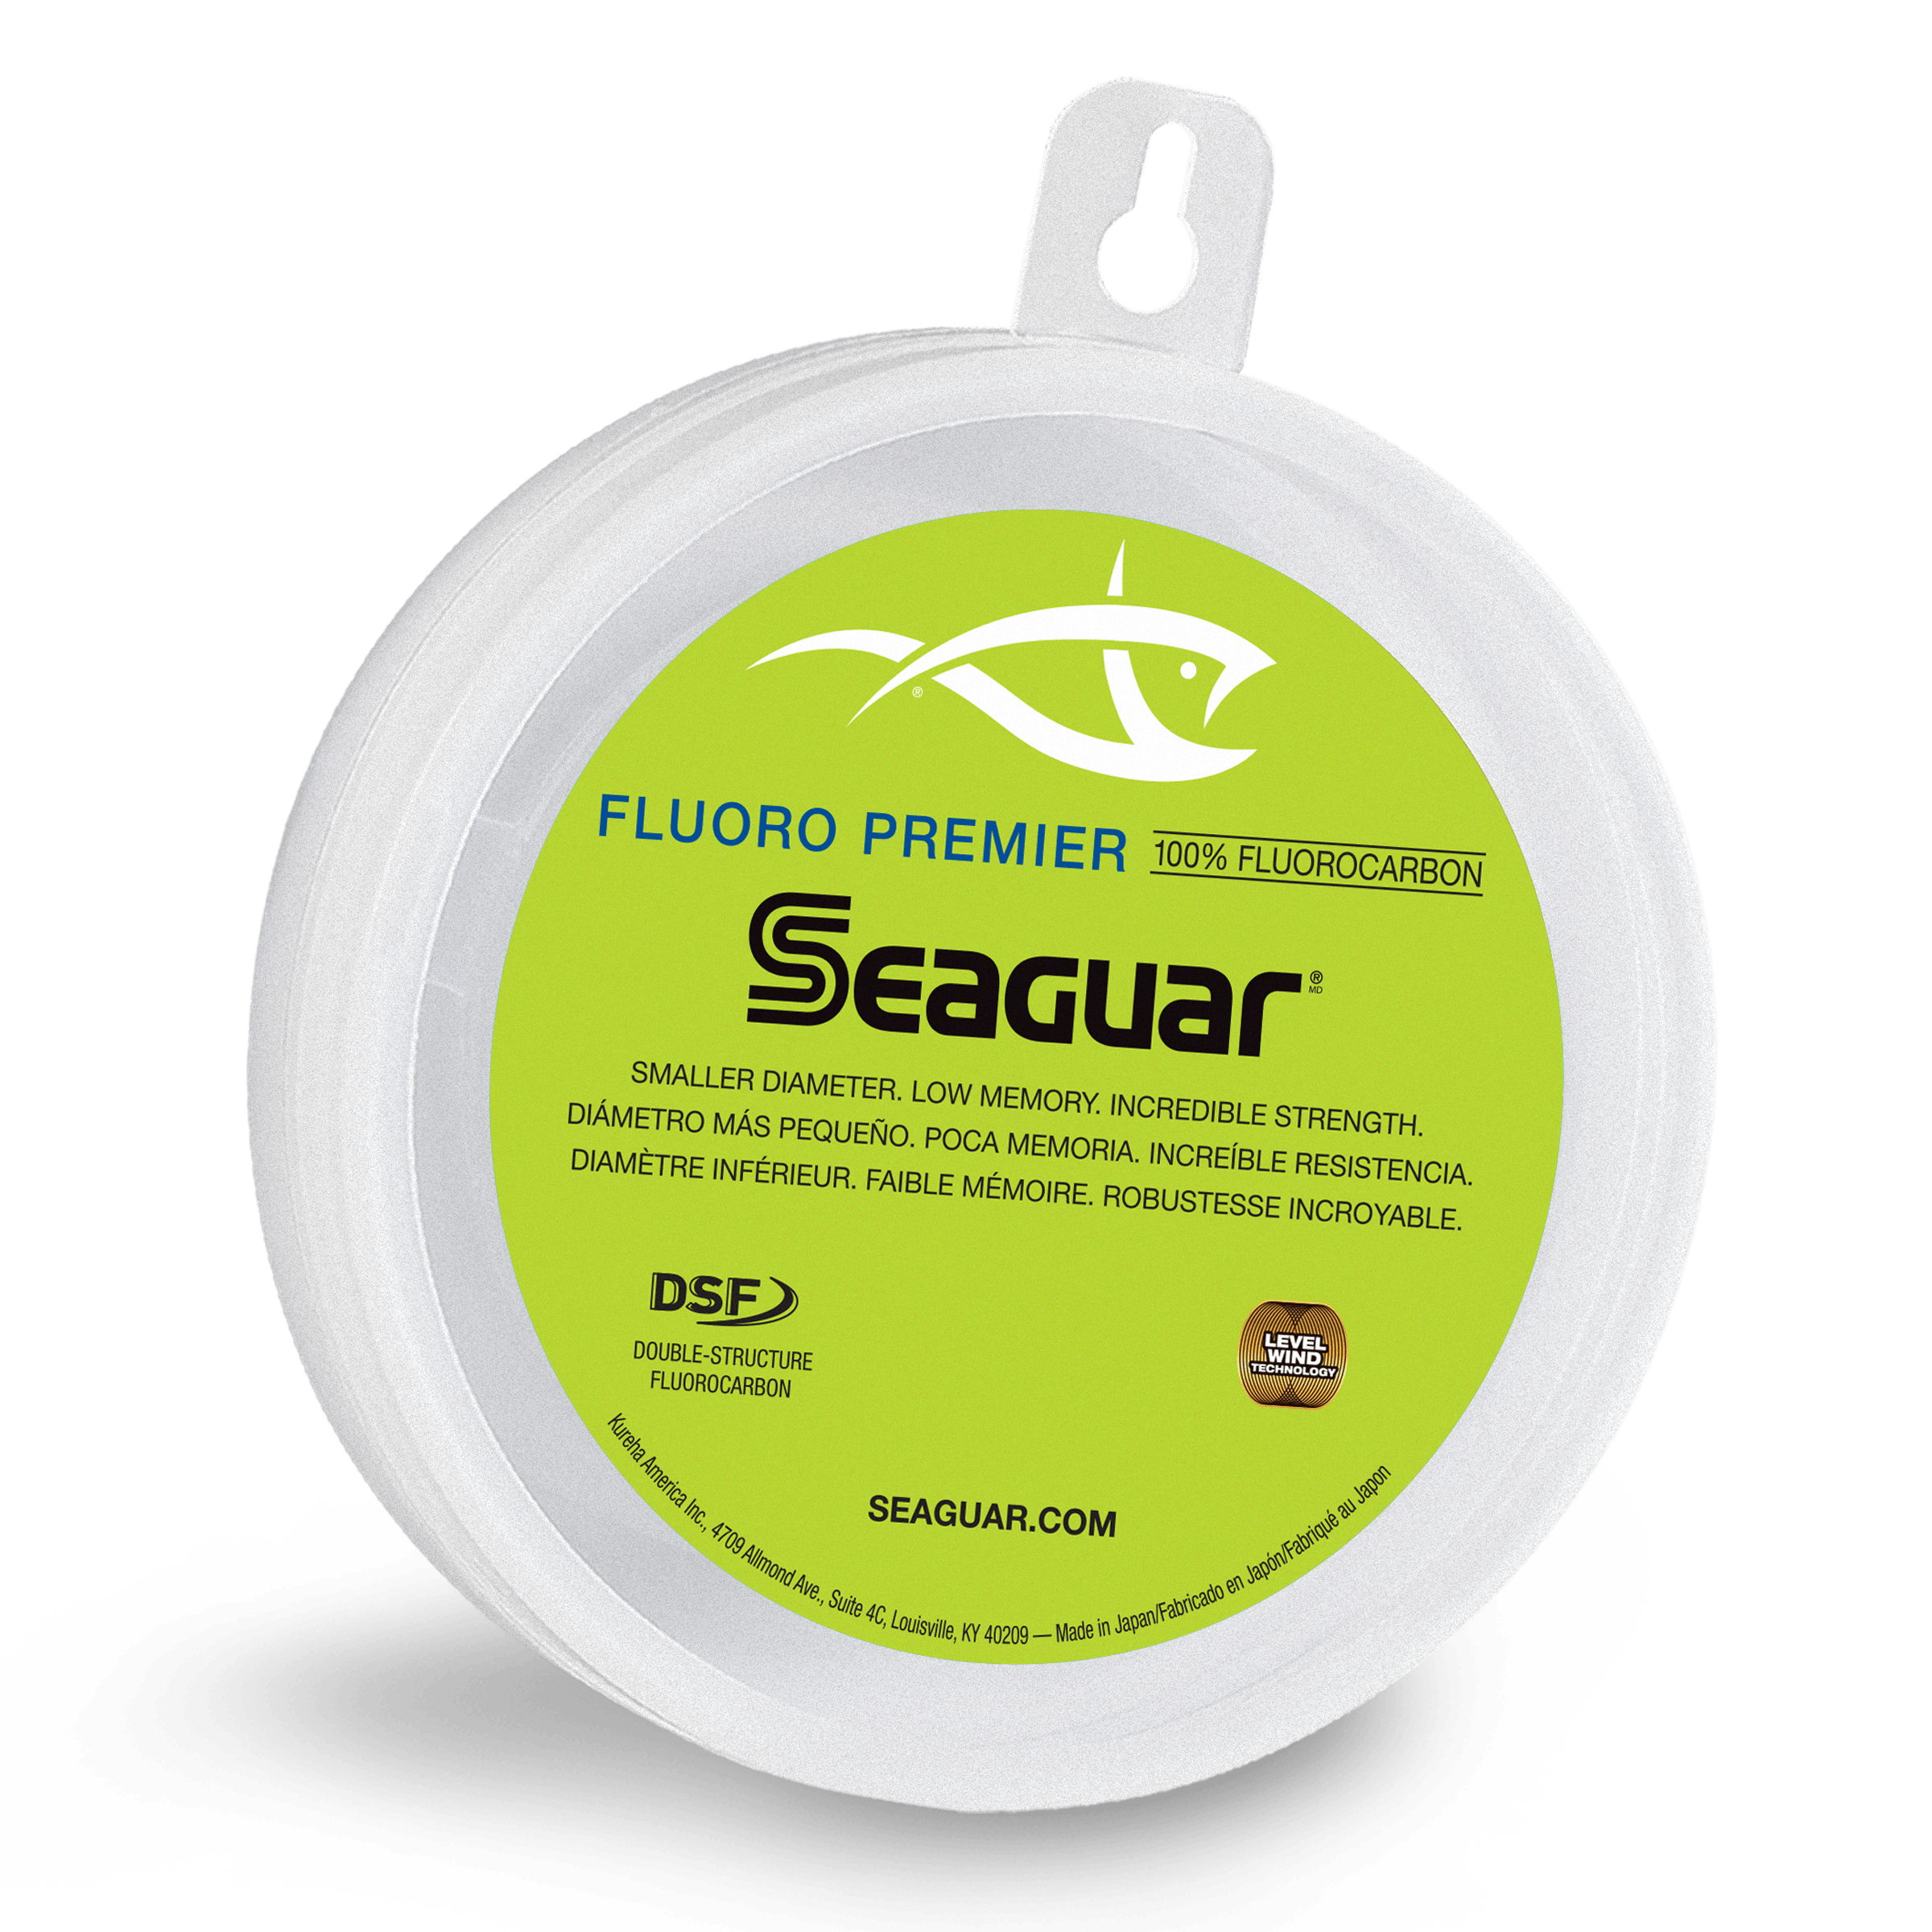 SEAGUAR New Saltwater Offshore Fishing 120% Fluorocarbon Leader